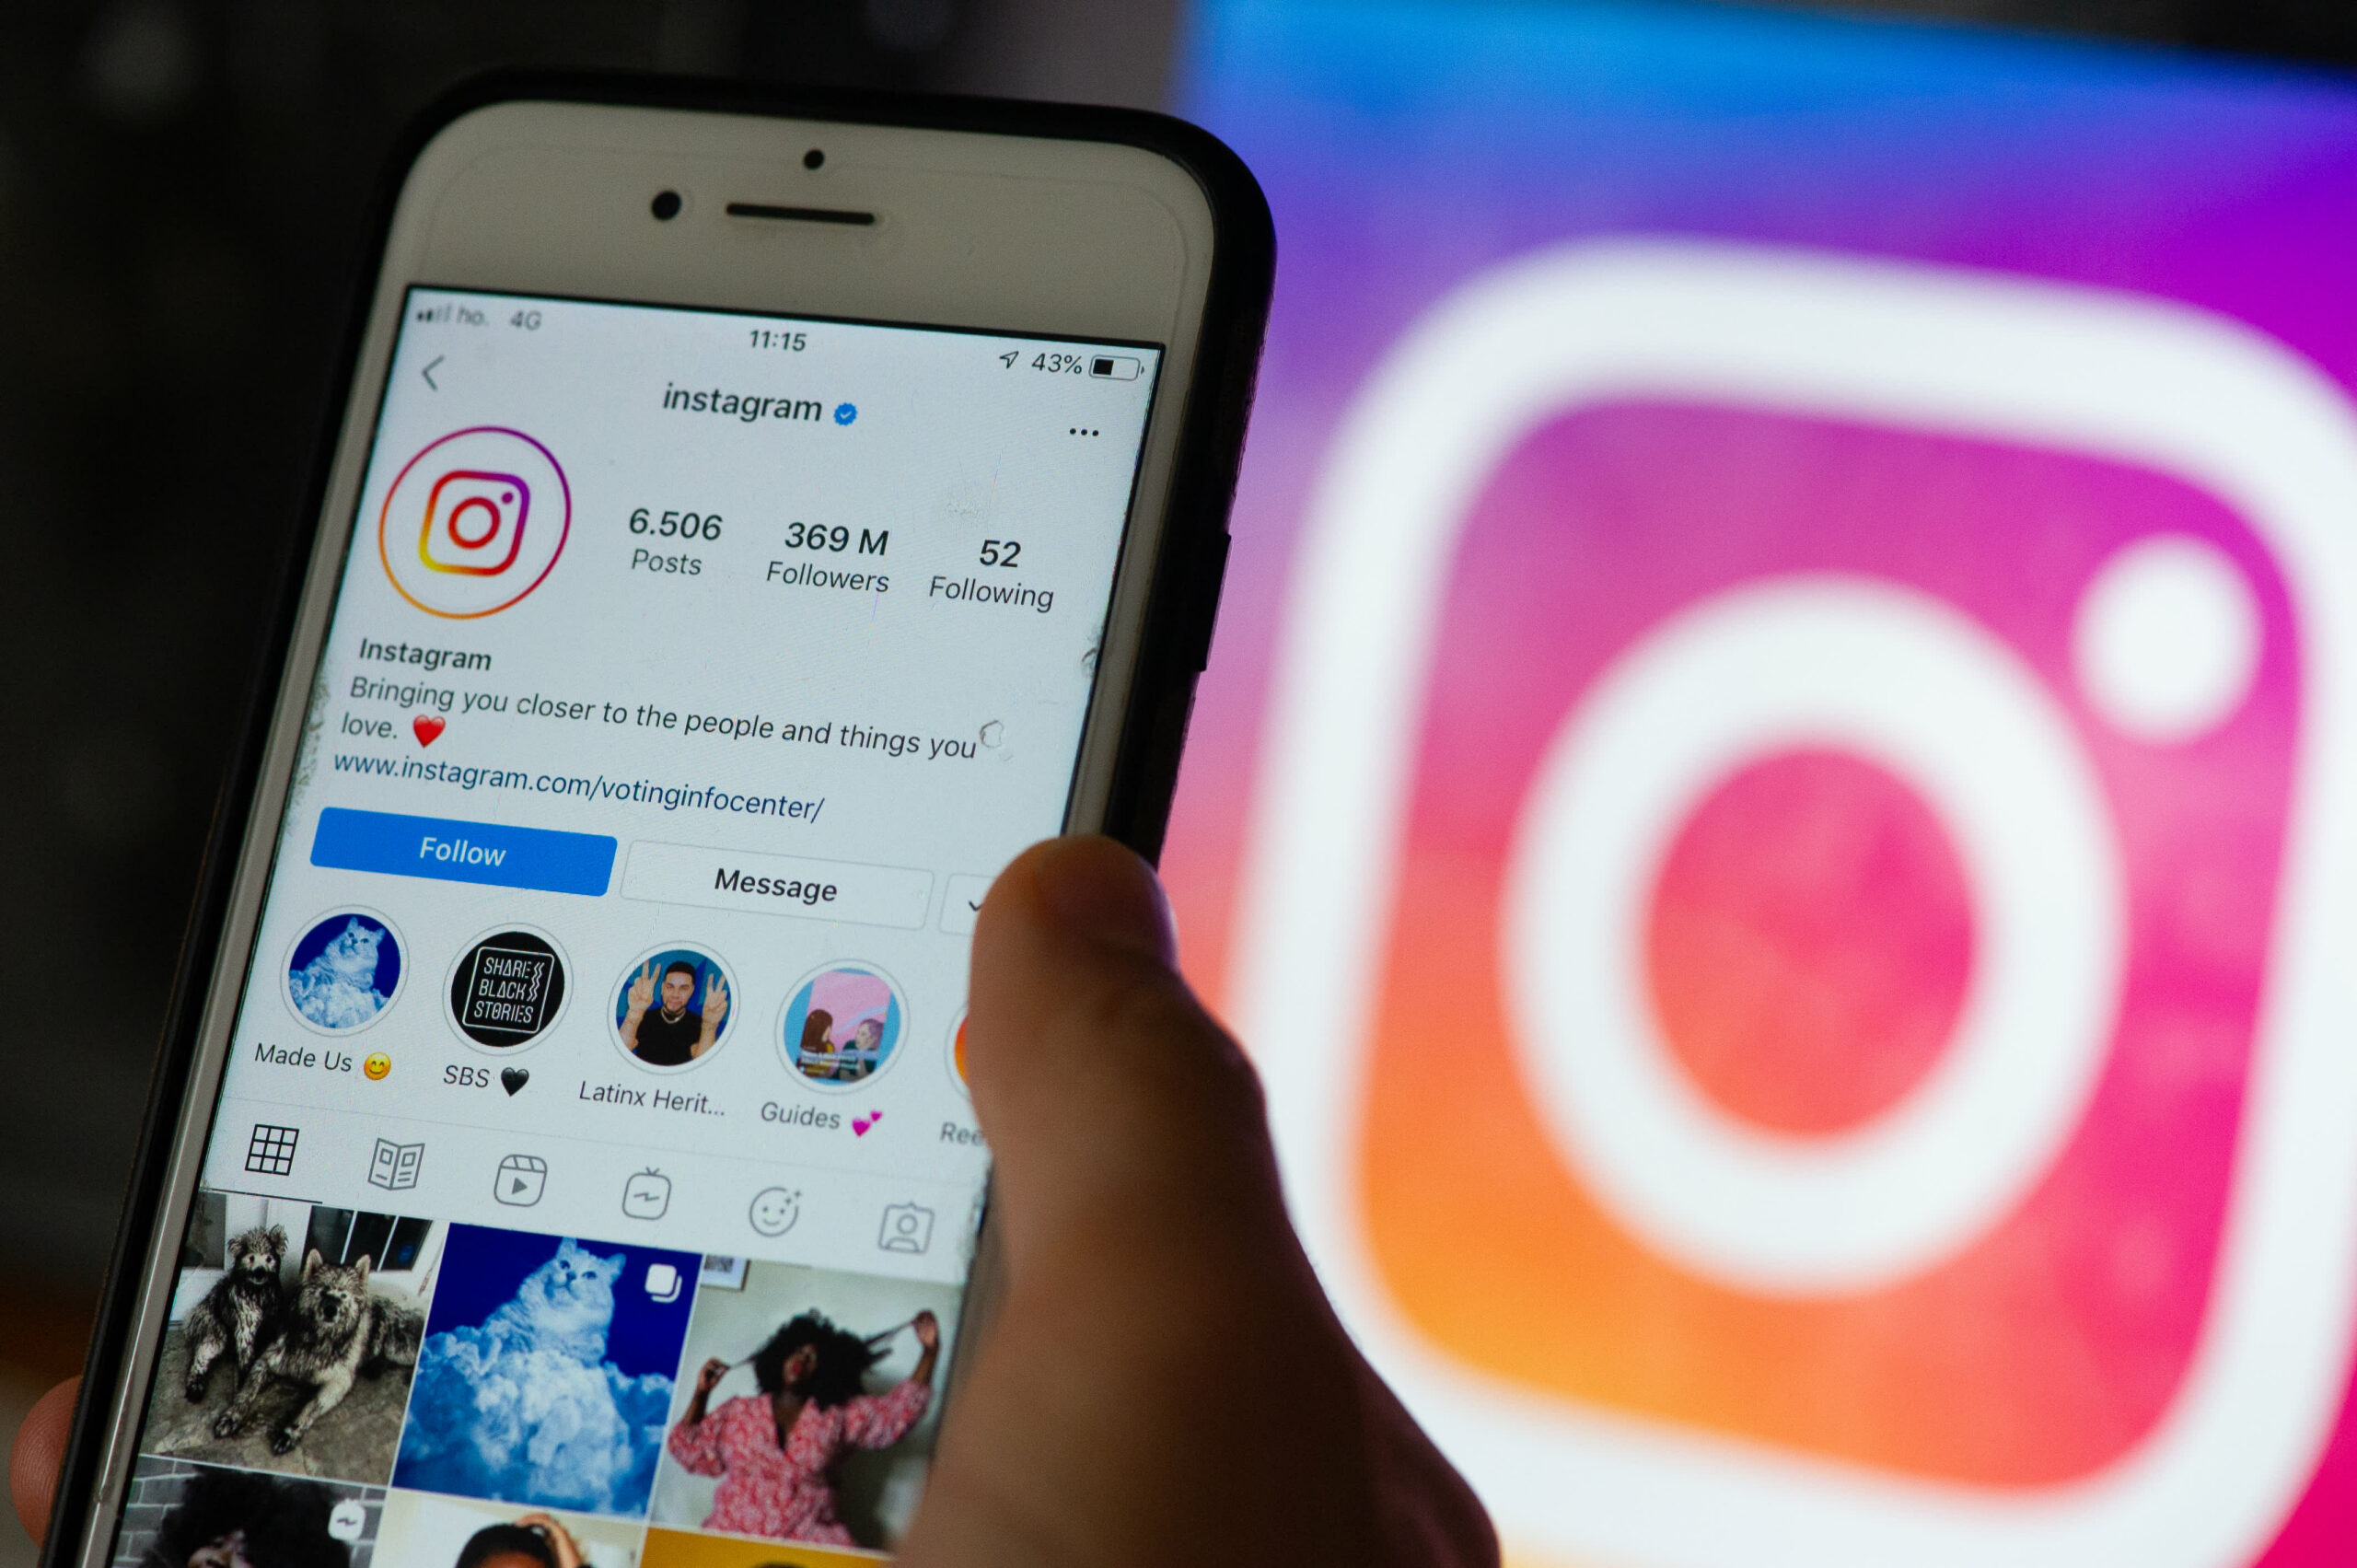 A New Instagram Update Gives You More Control Over What Appears in Your Feed